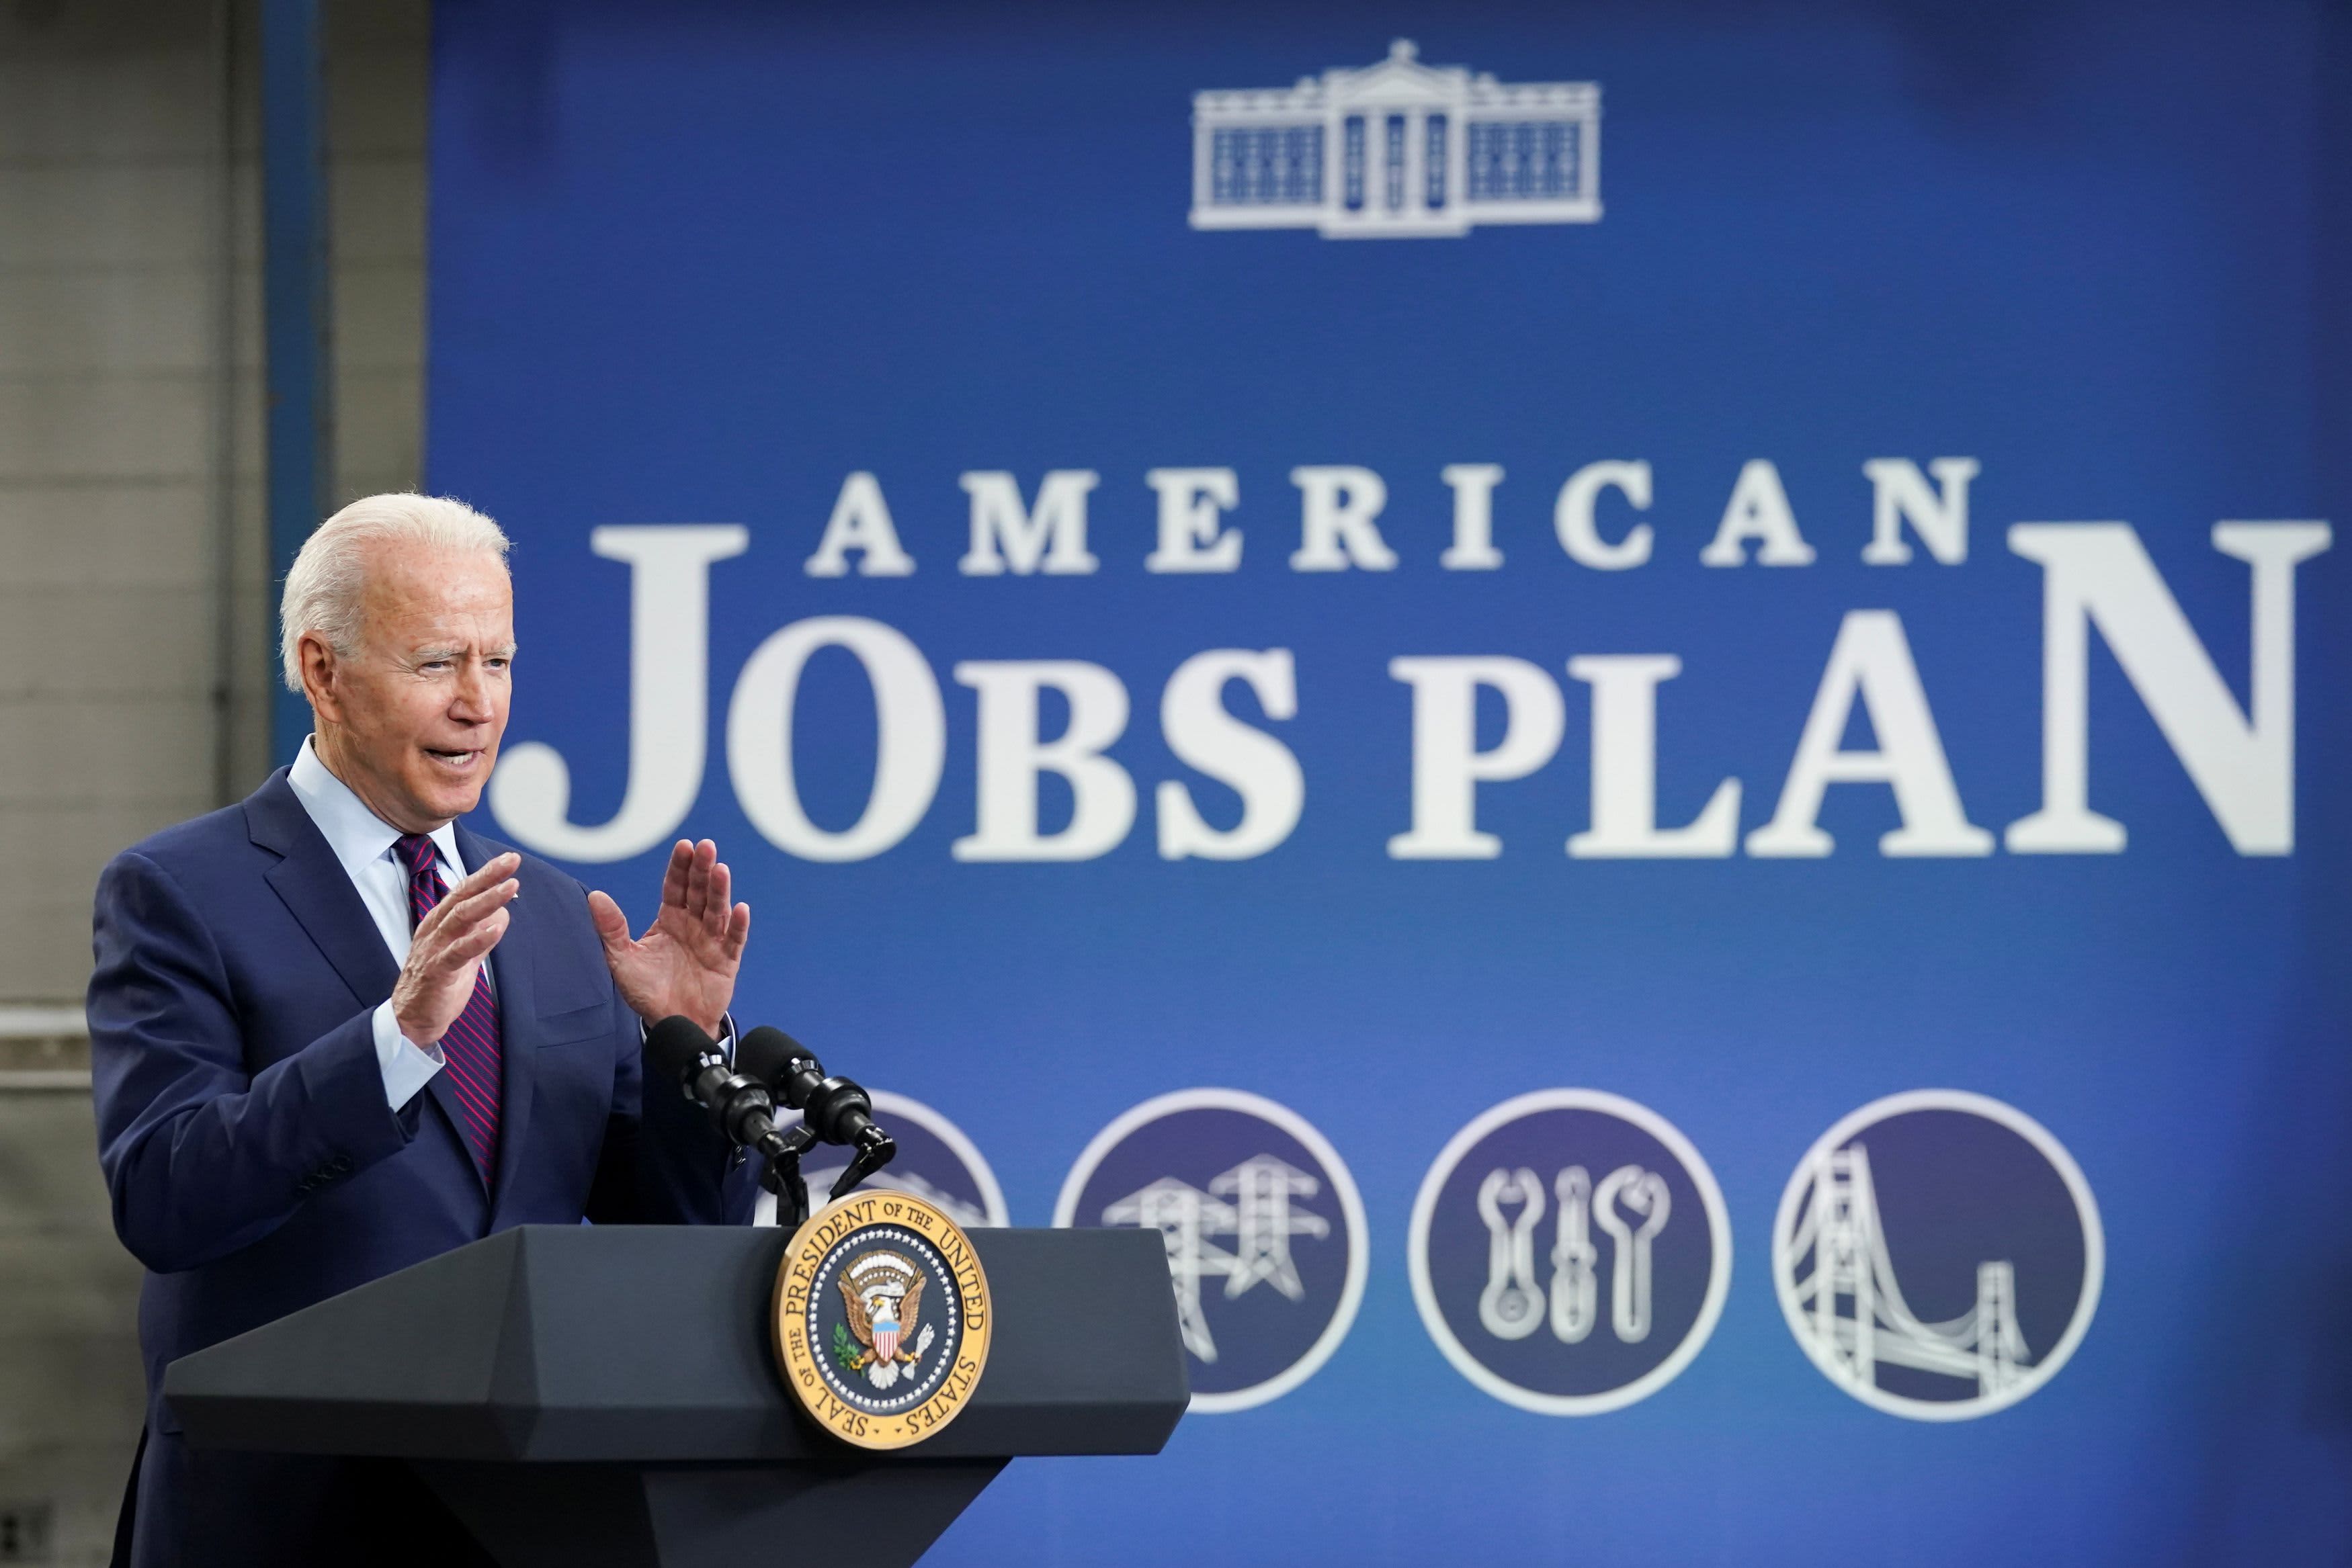 Biden's infrastructure plan would cut U.S. debt and slightly increase economic growth, Wharton study finds - CNBC